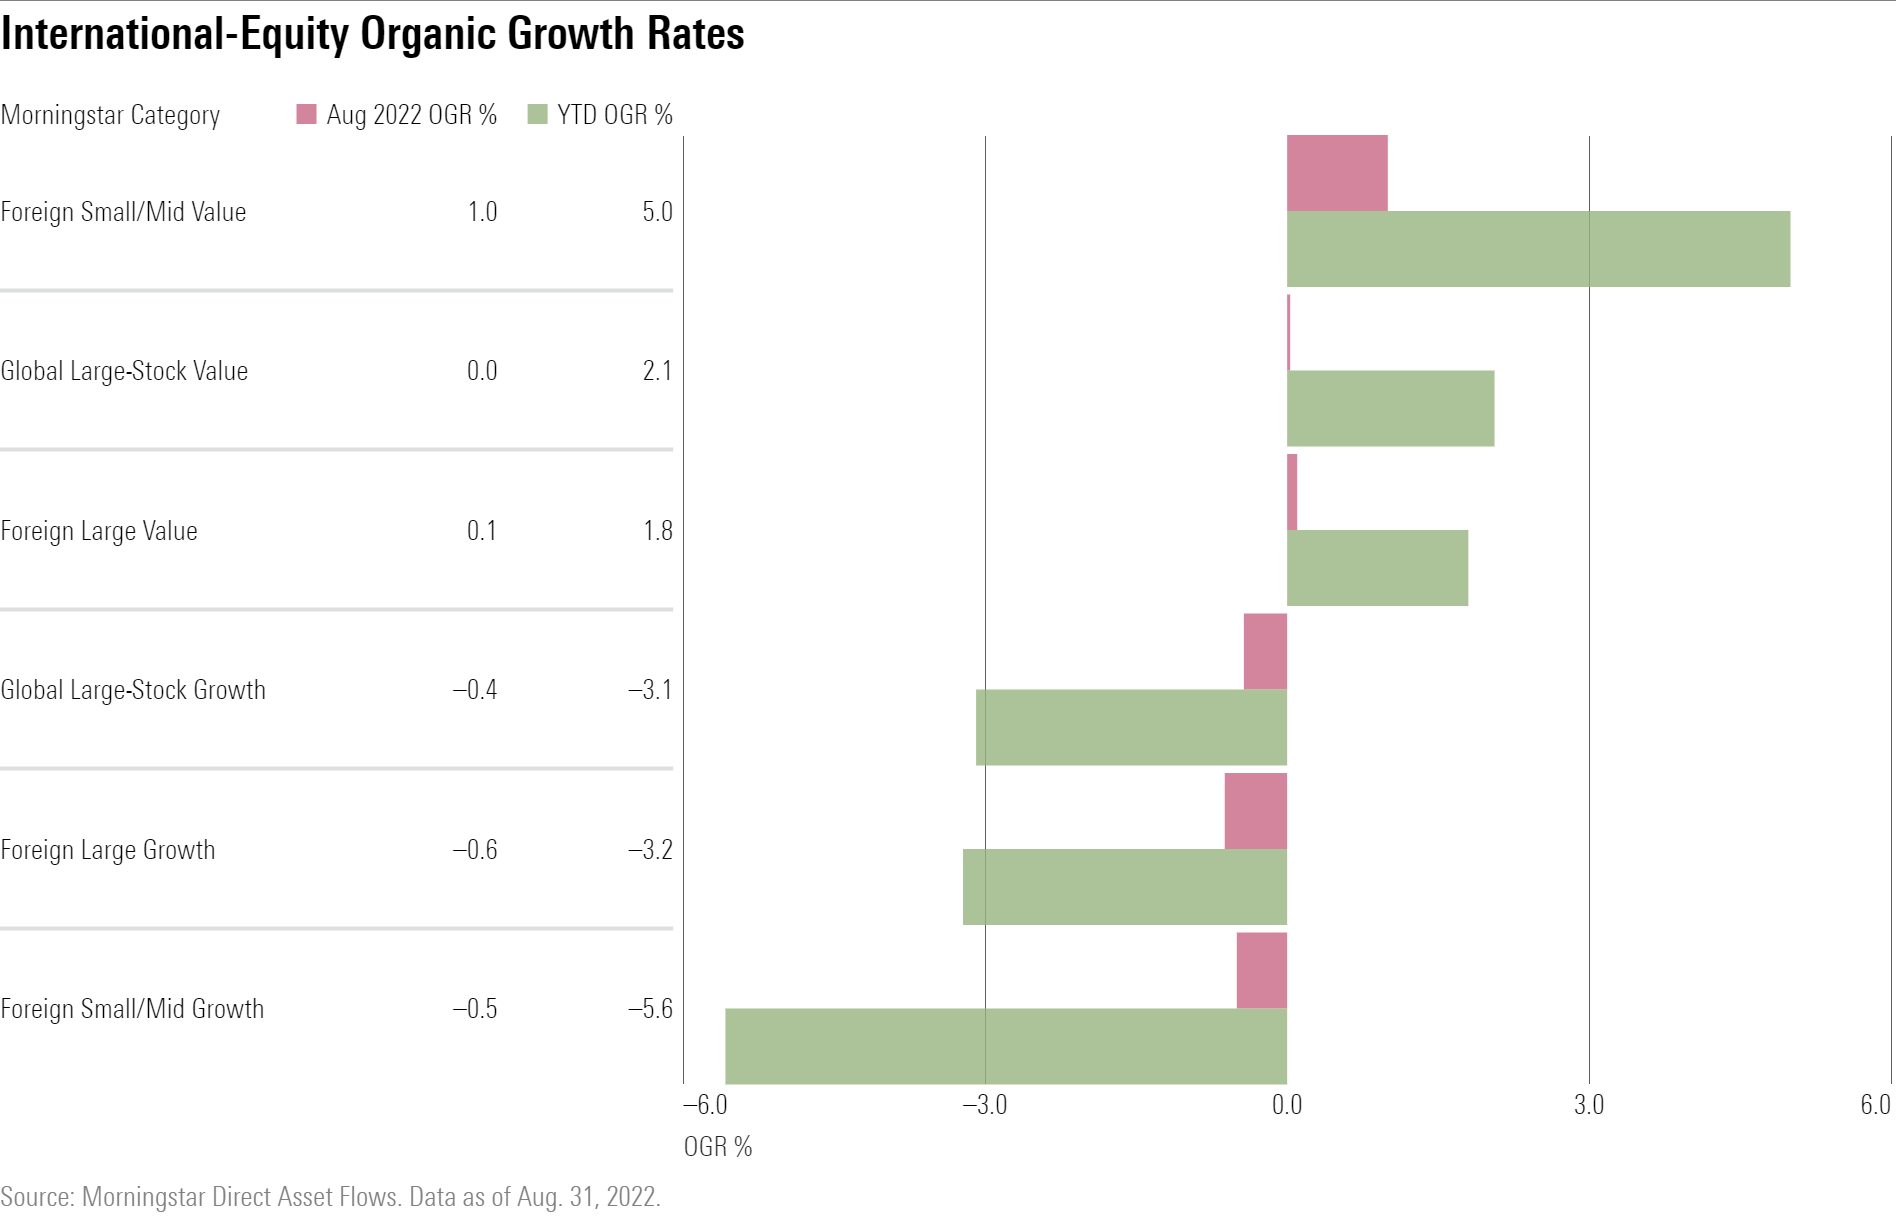 A bar chart showing the year-to-date and August forganic growth rates for the International-equity fund categories.